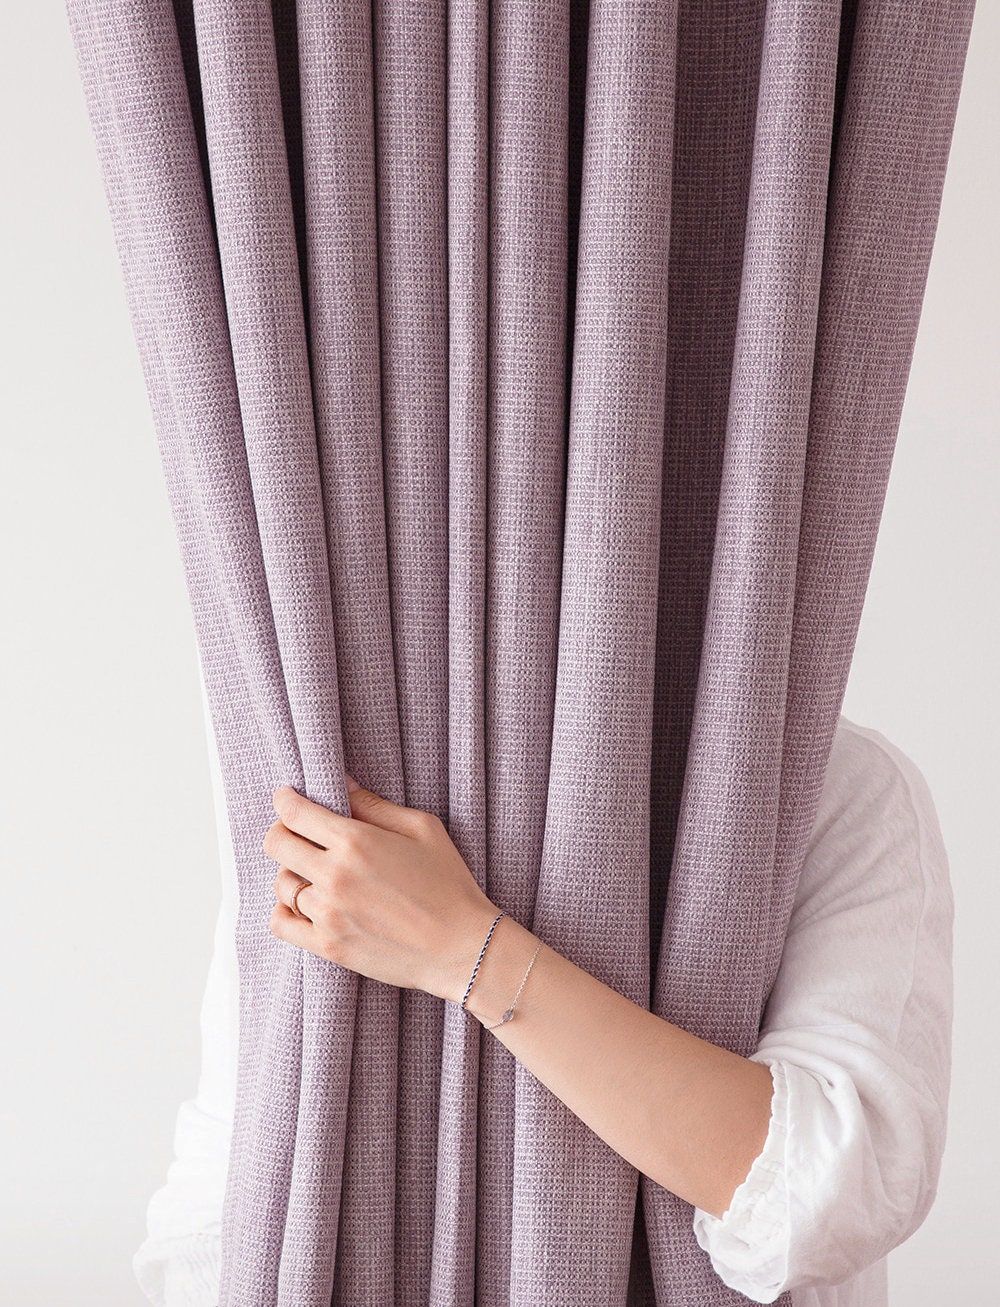 Purple Curtains: Adding Regal Elegance to Your Space